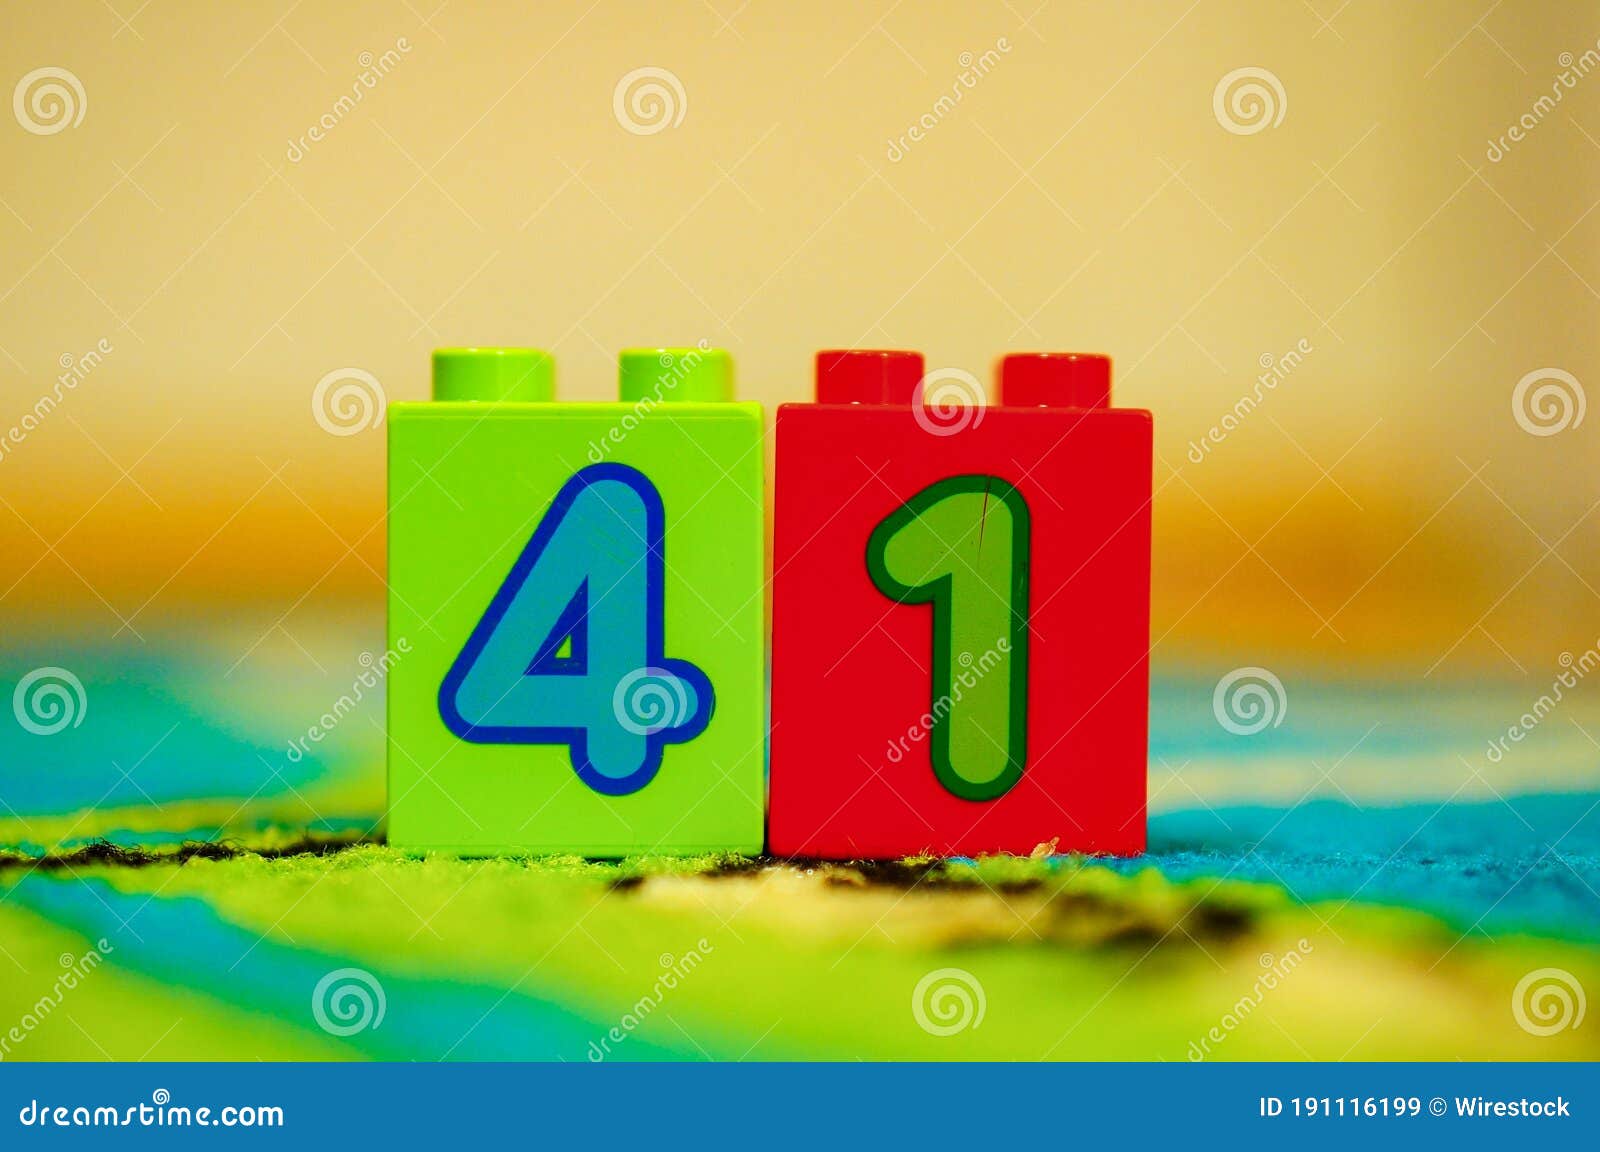 Lego Duplo Toy Blocks with Number Stock Image - Image of cubes, carpet:  191116199